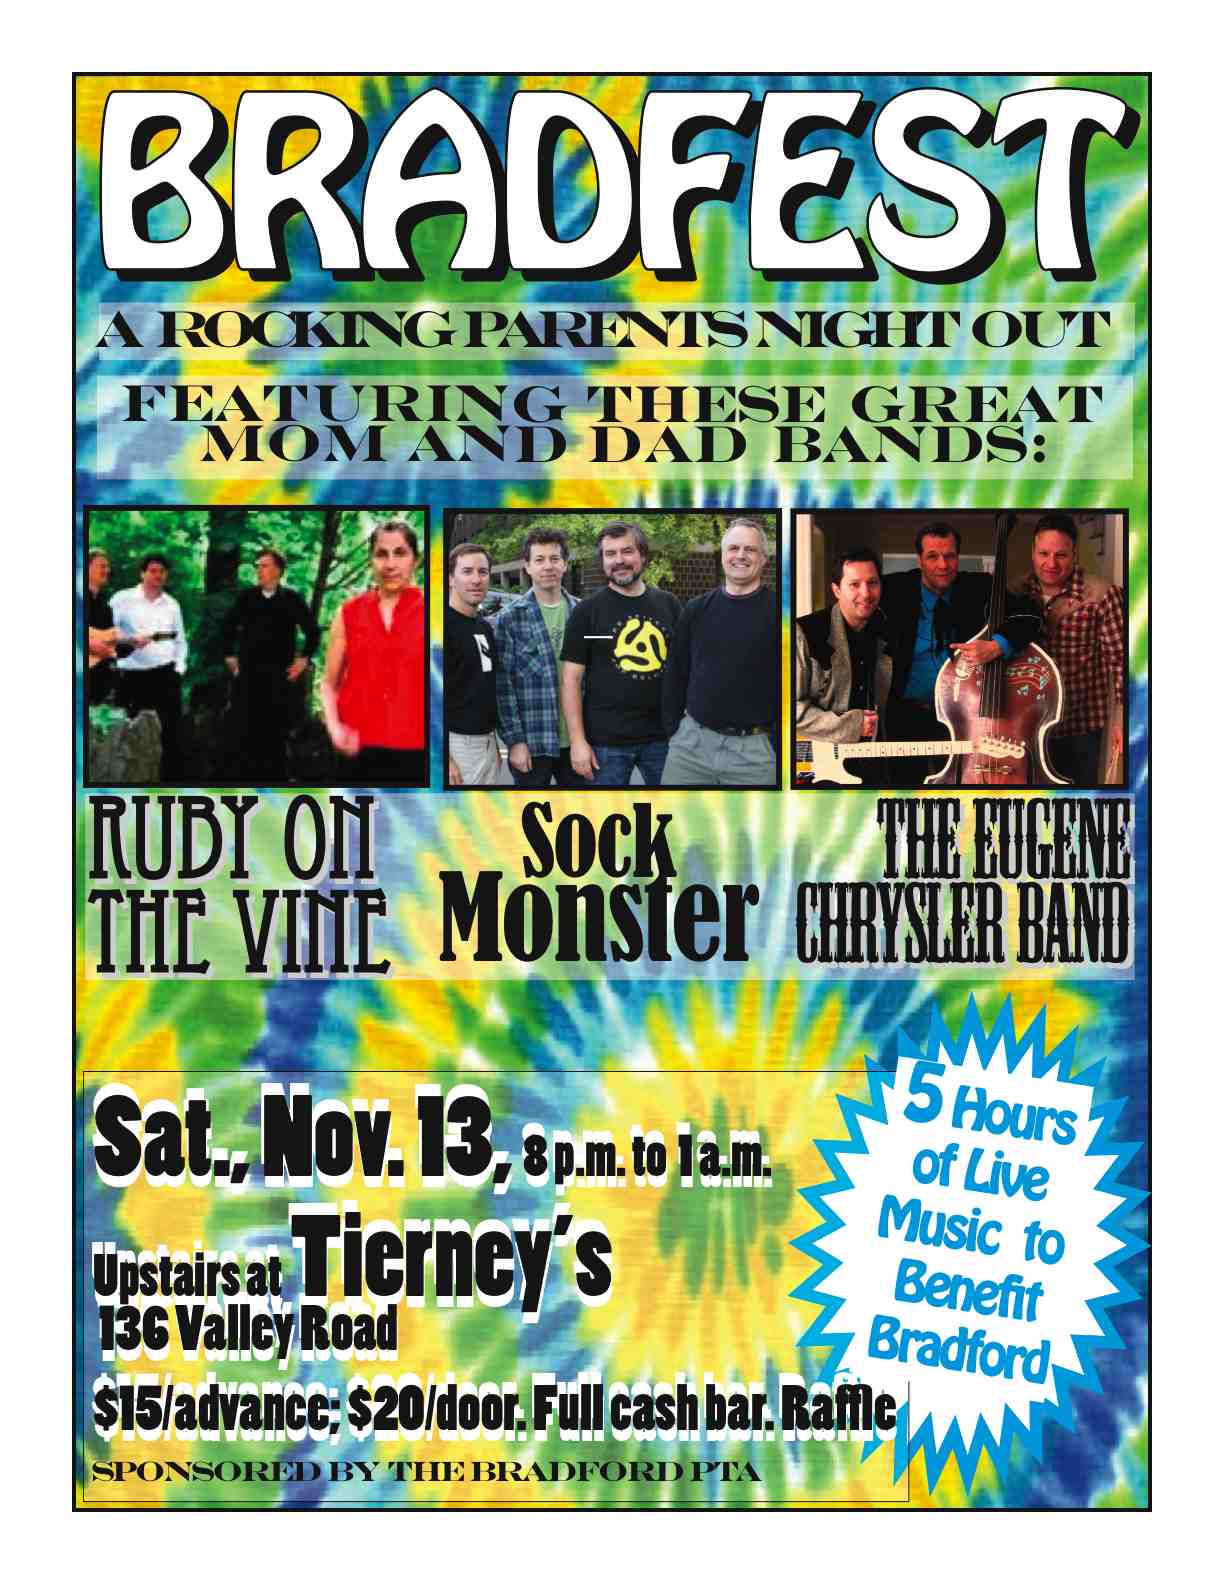 Parents Who Rock: 3 PWR Bands Play BRADFEST to Raise Money for Bradford ...